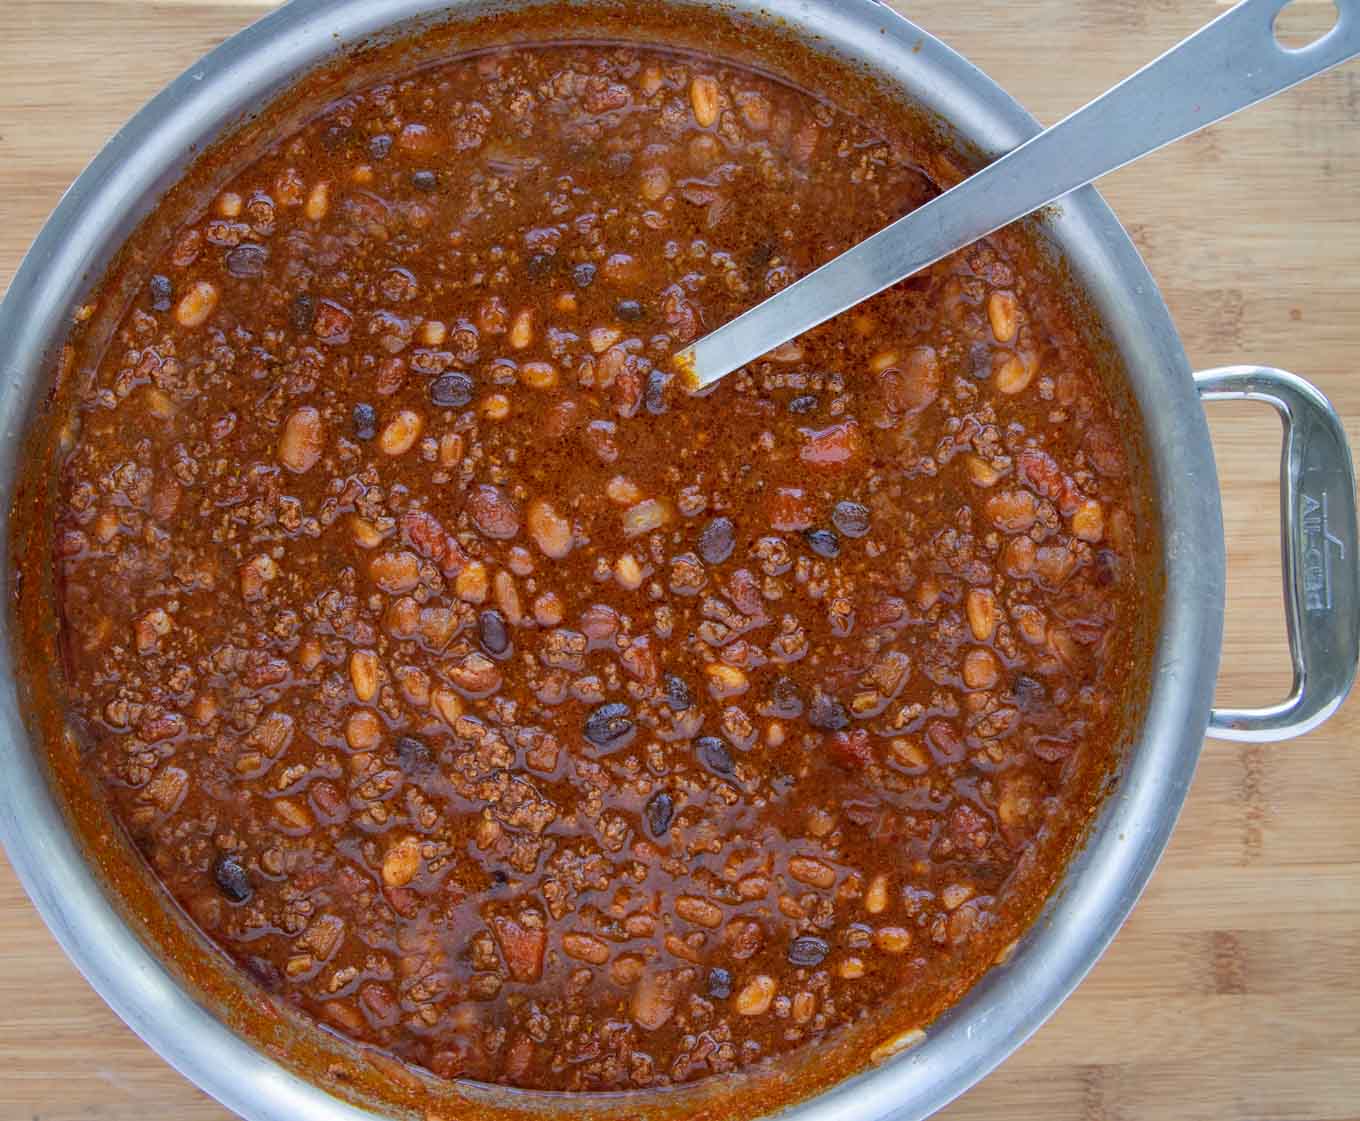 cooked chili in a large saucepan